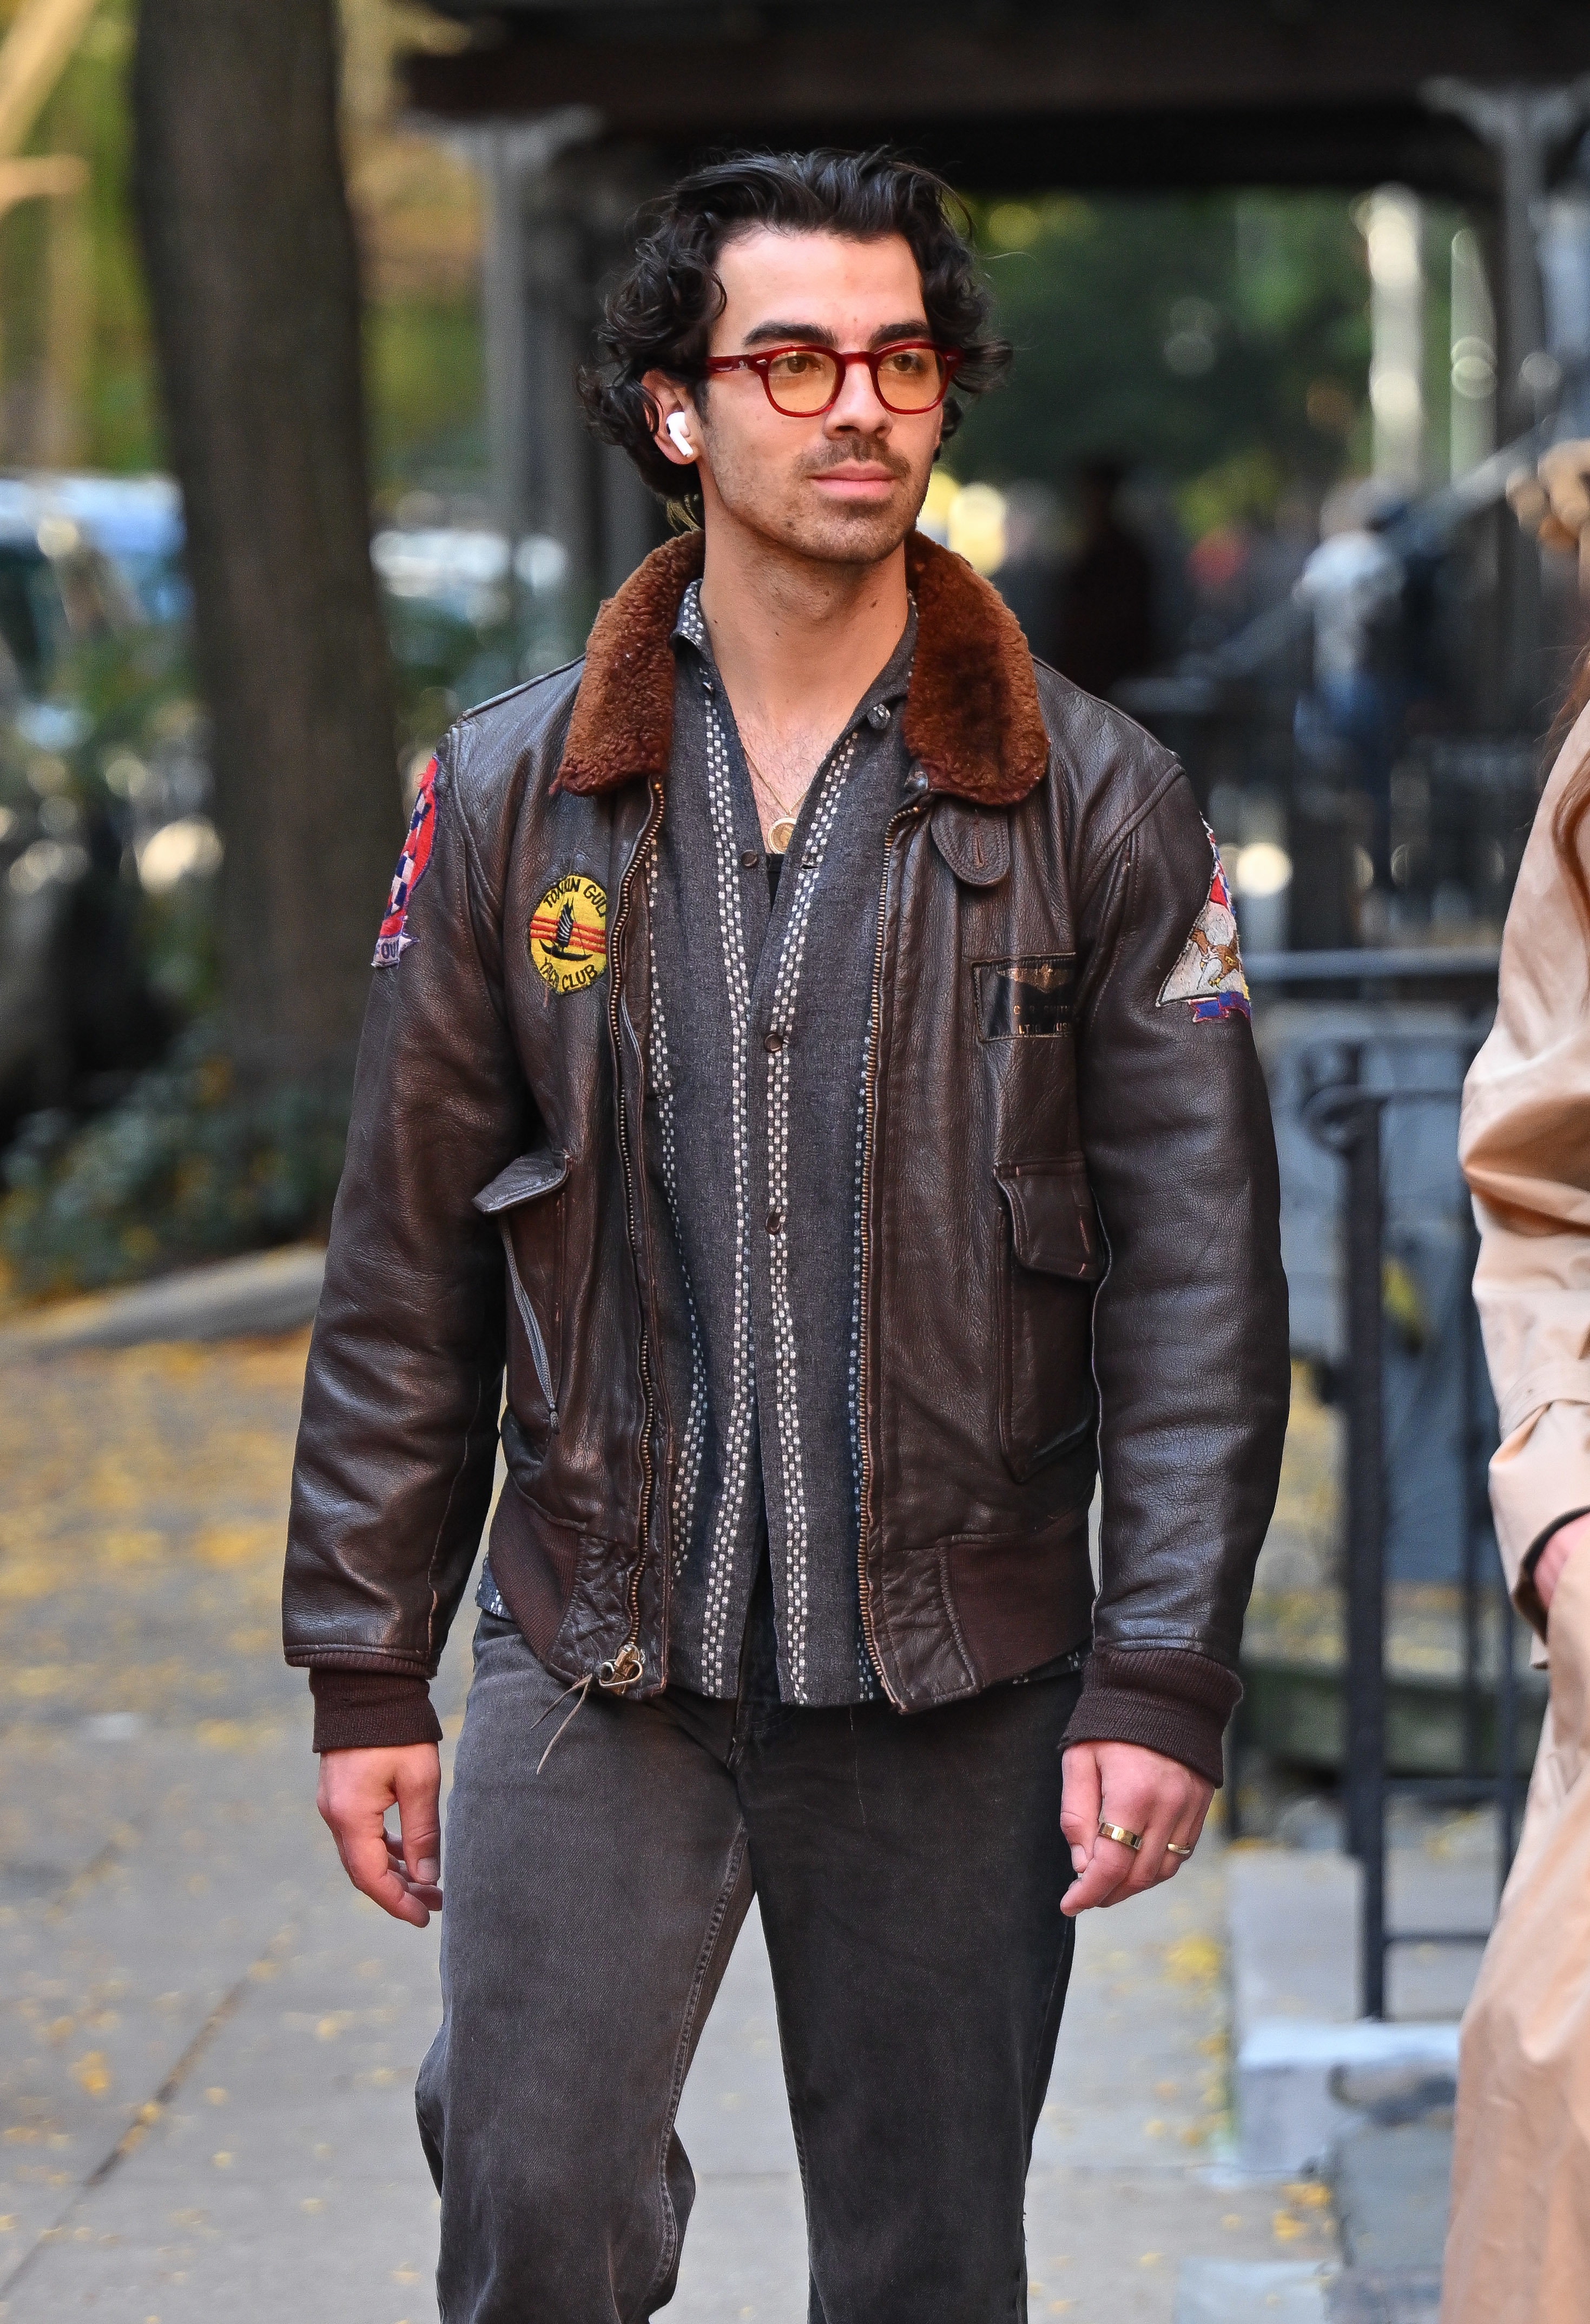 Close-up of Joe on the street in a short jacket and pants